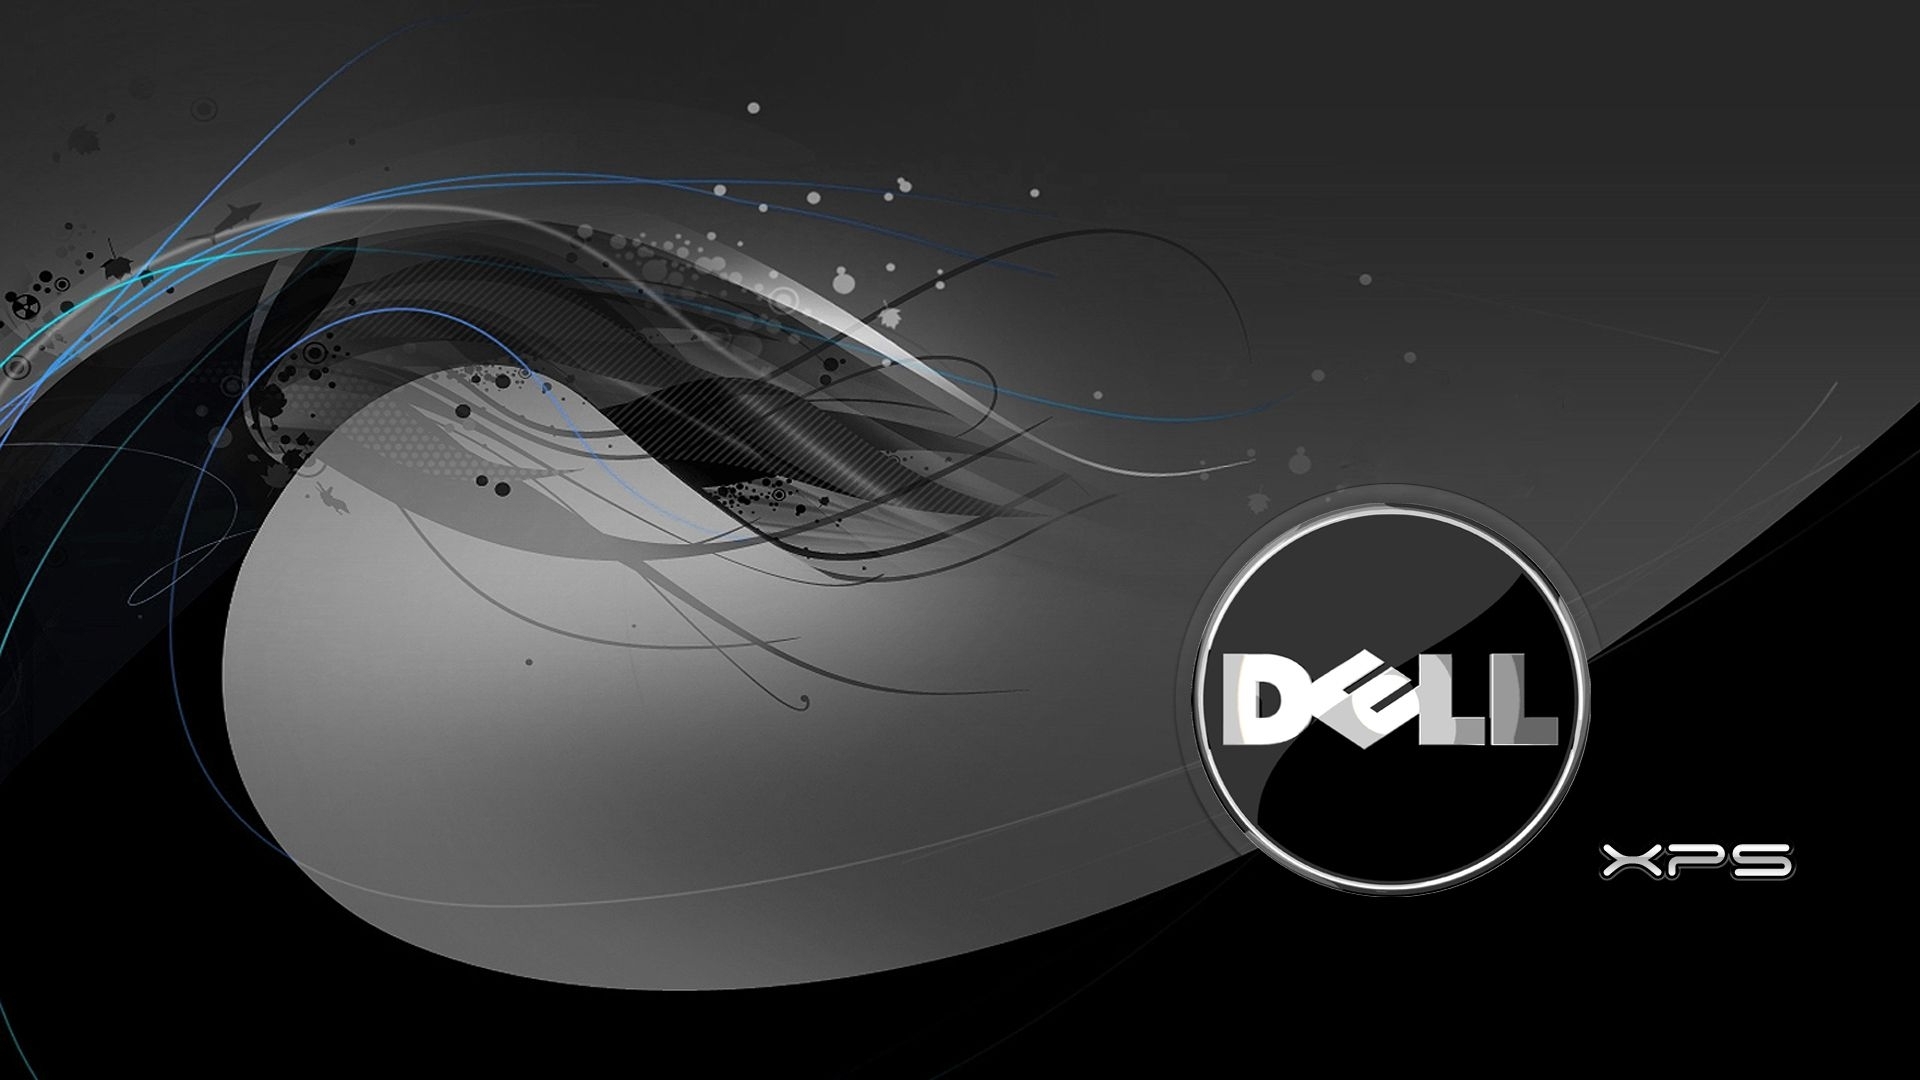 10 Top Wallpaper For Dell Laptop FULL HD 1080p For PC Background